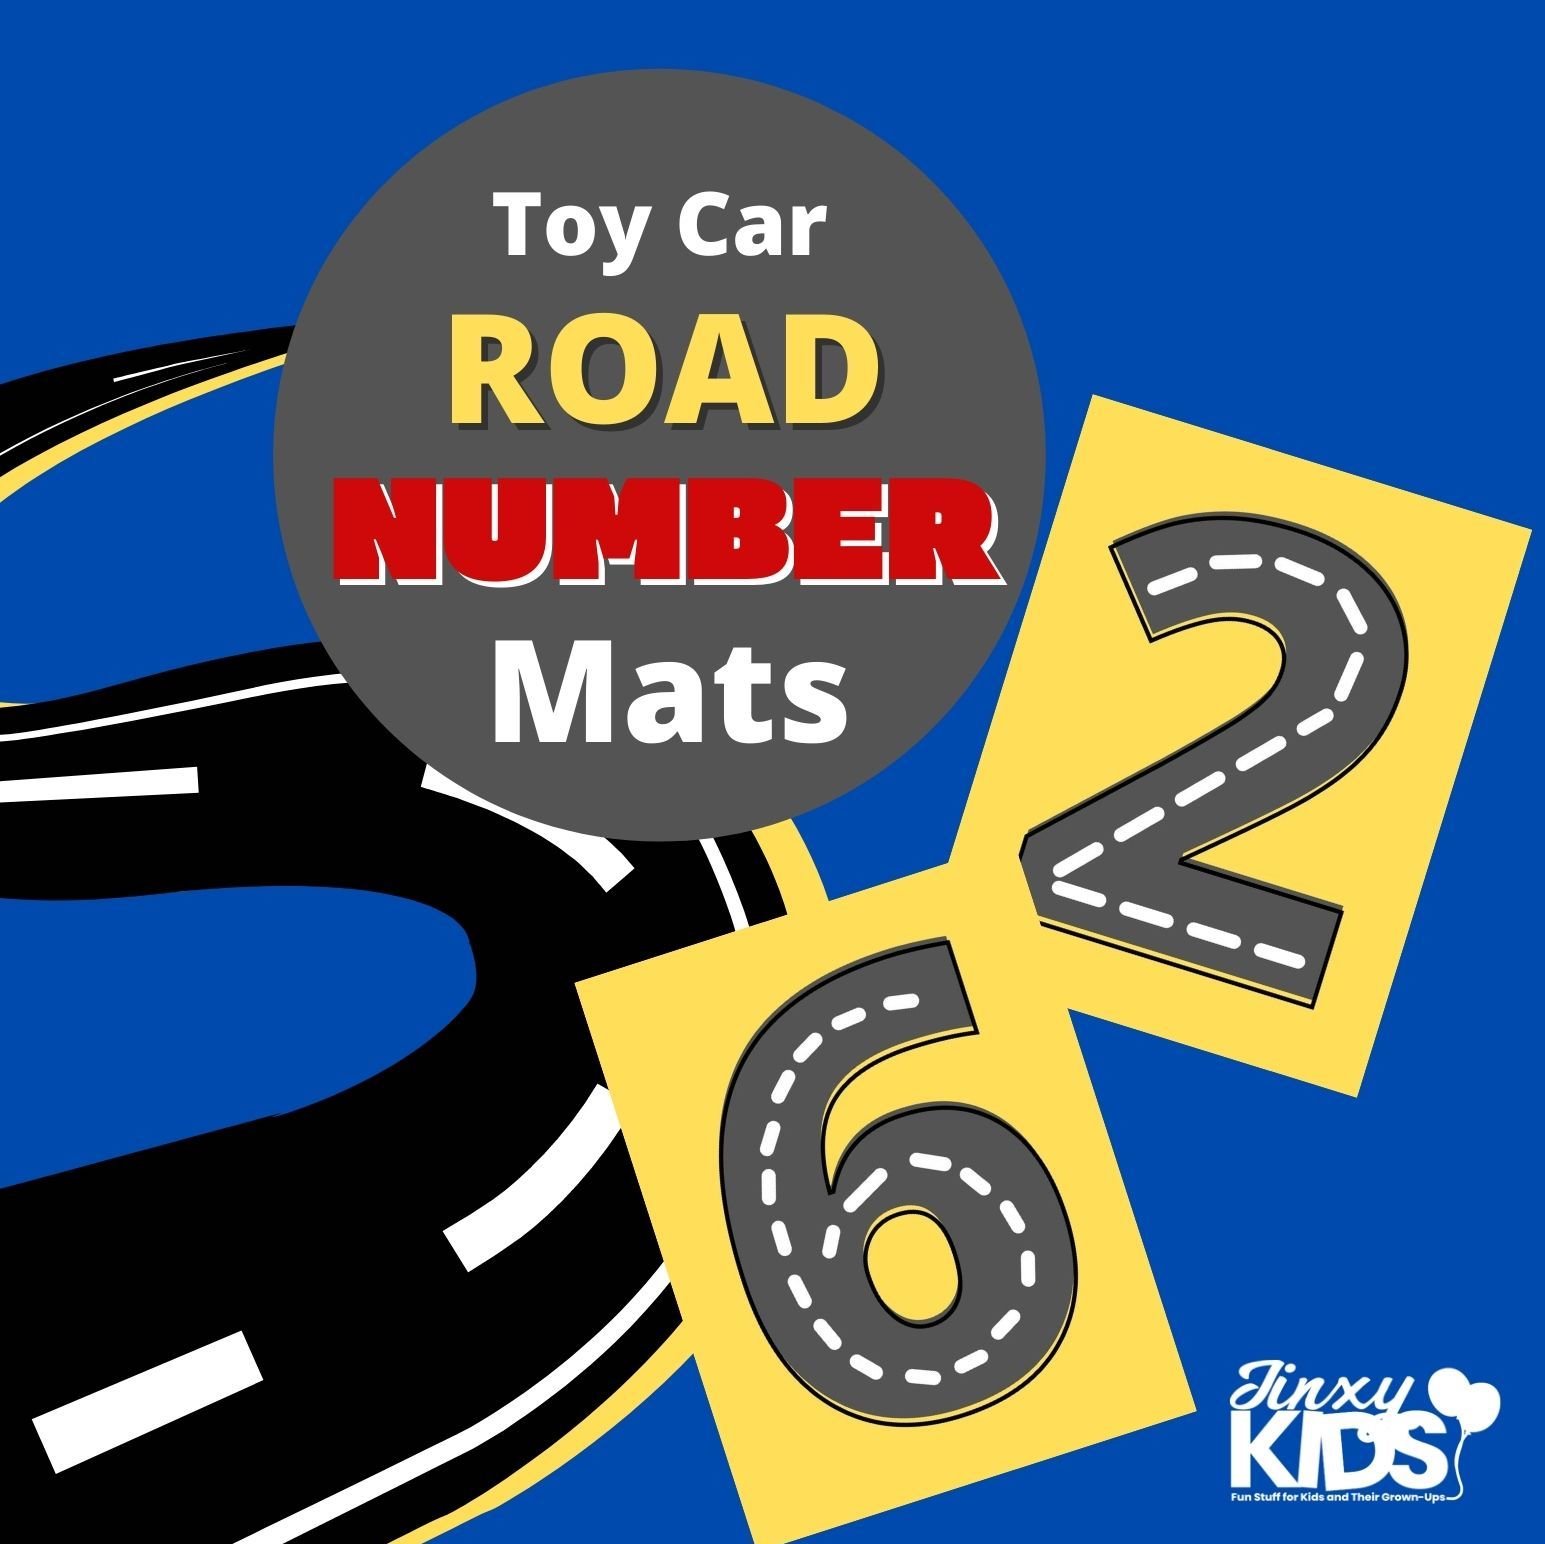 Toy Car Road Number Mats